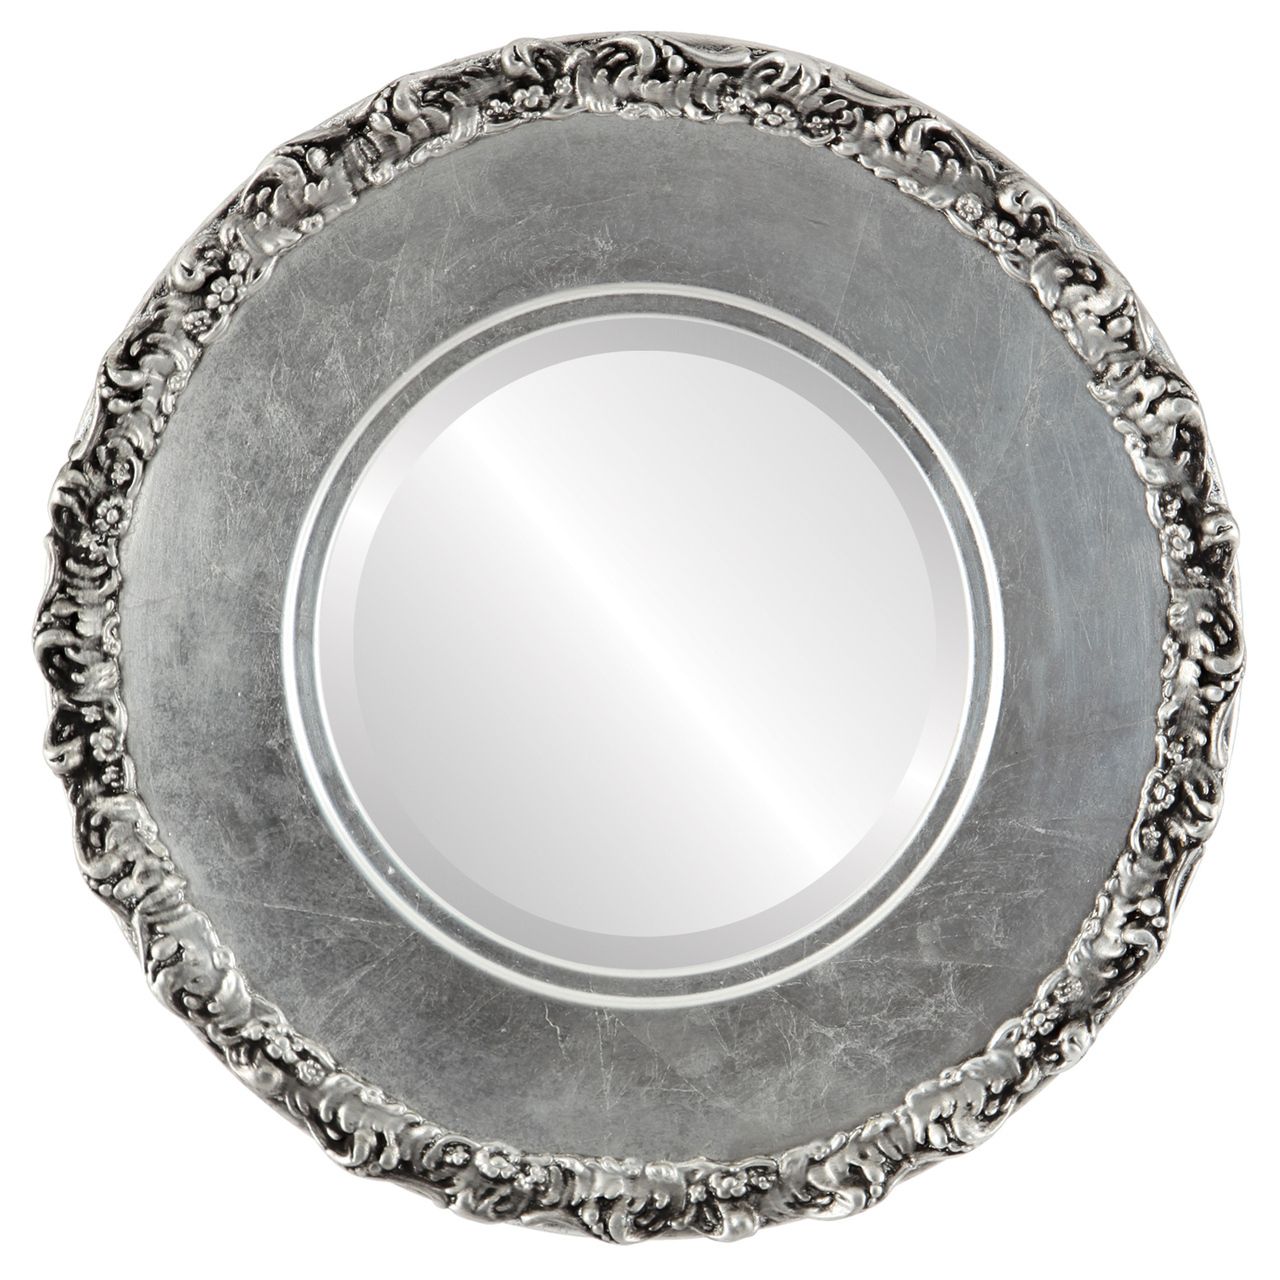 Antique Silver Round Mirrors From $153 | Free Shipping Regarding Silver Leaf Round Wall Mirrors (View 4 of 15)